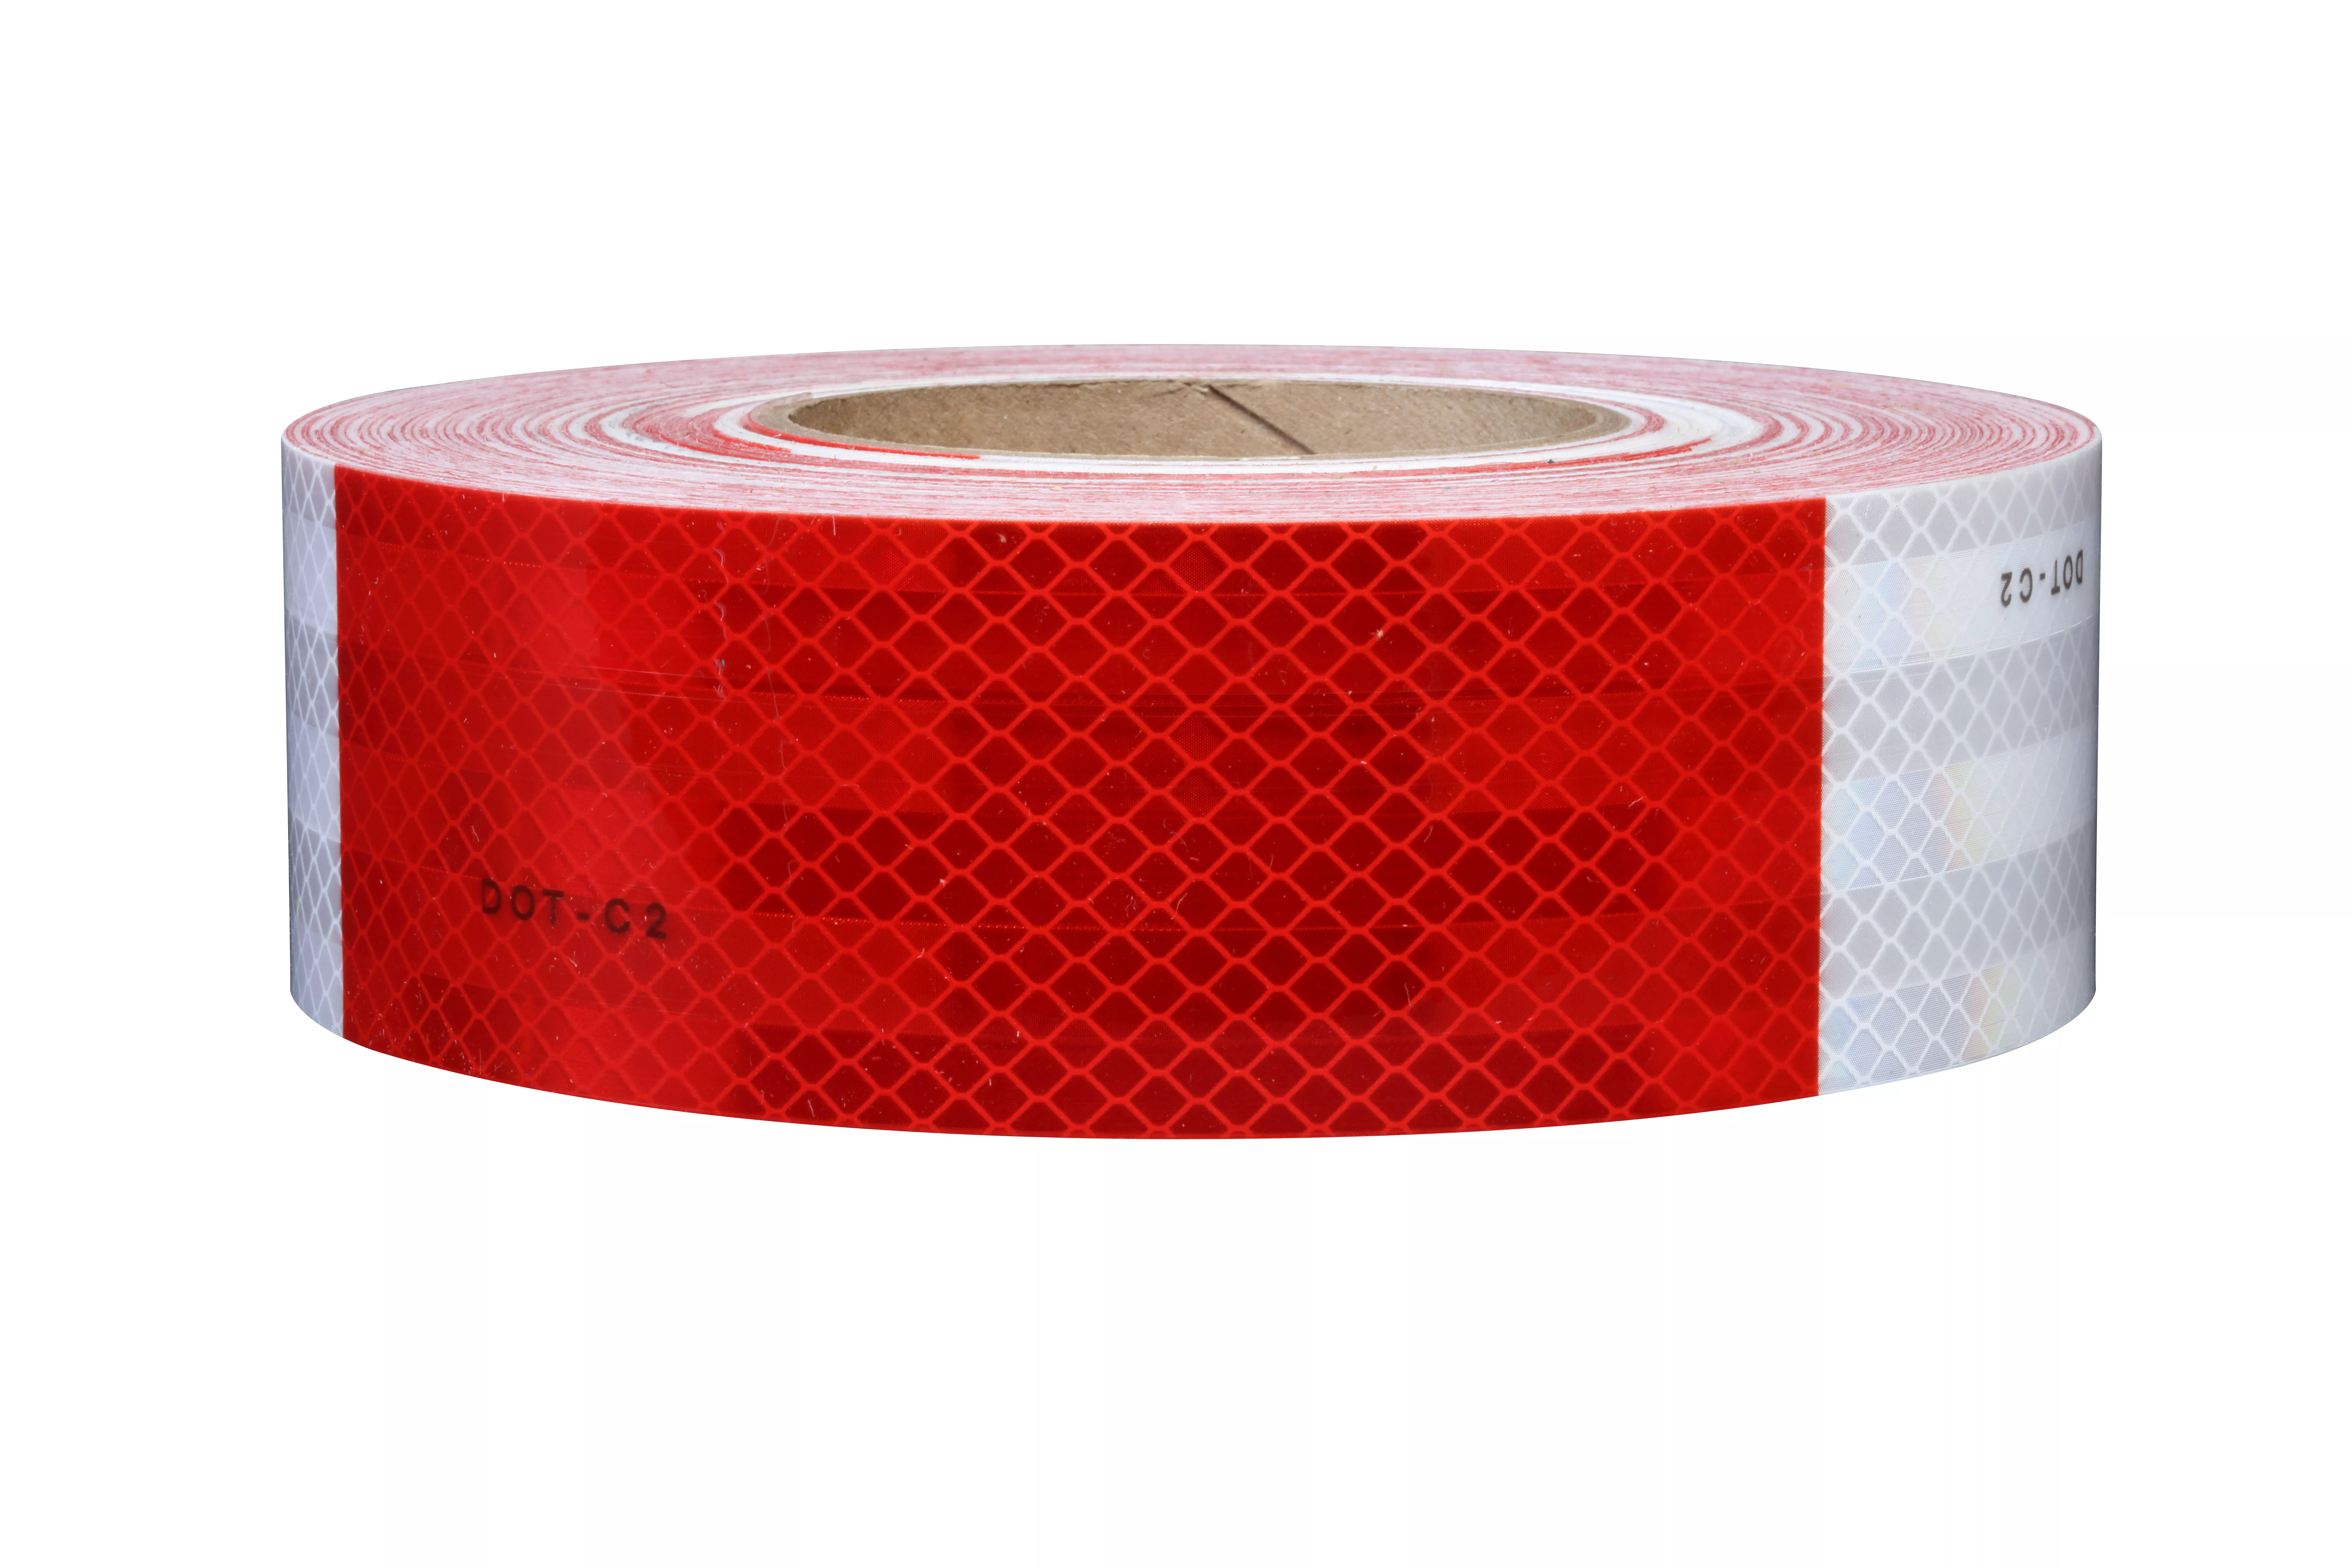 3M™ Diamond Grade™ Conspicuity Markings 983-326, Red/White, 2 in x 50
yd, Kiss-cut every 96 in